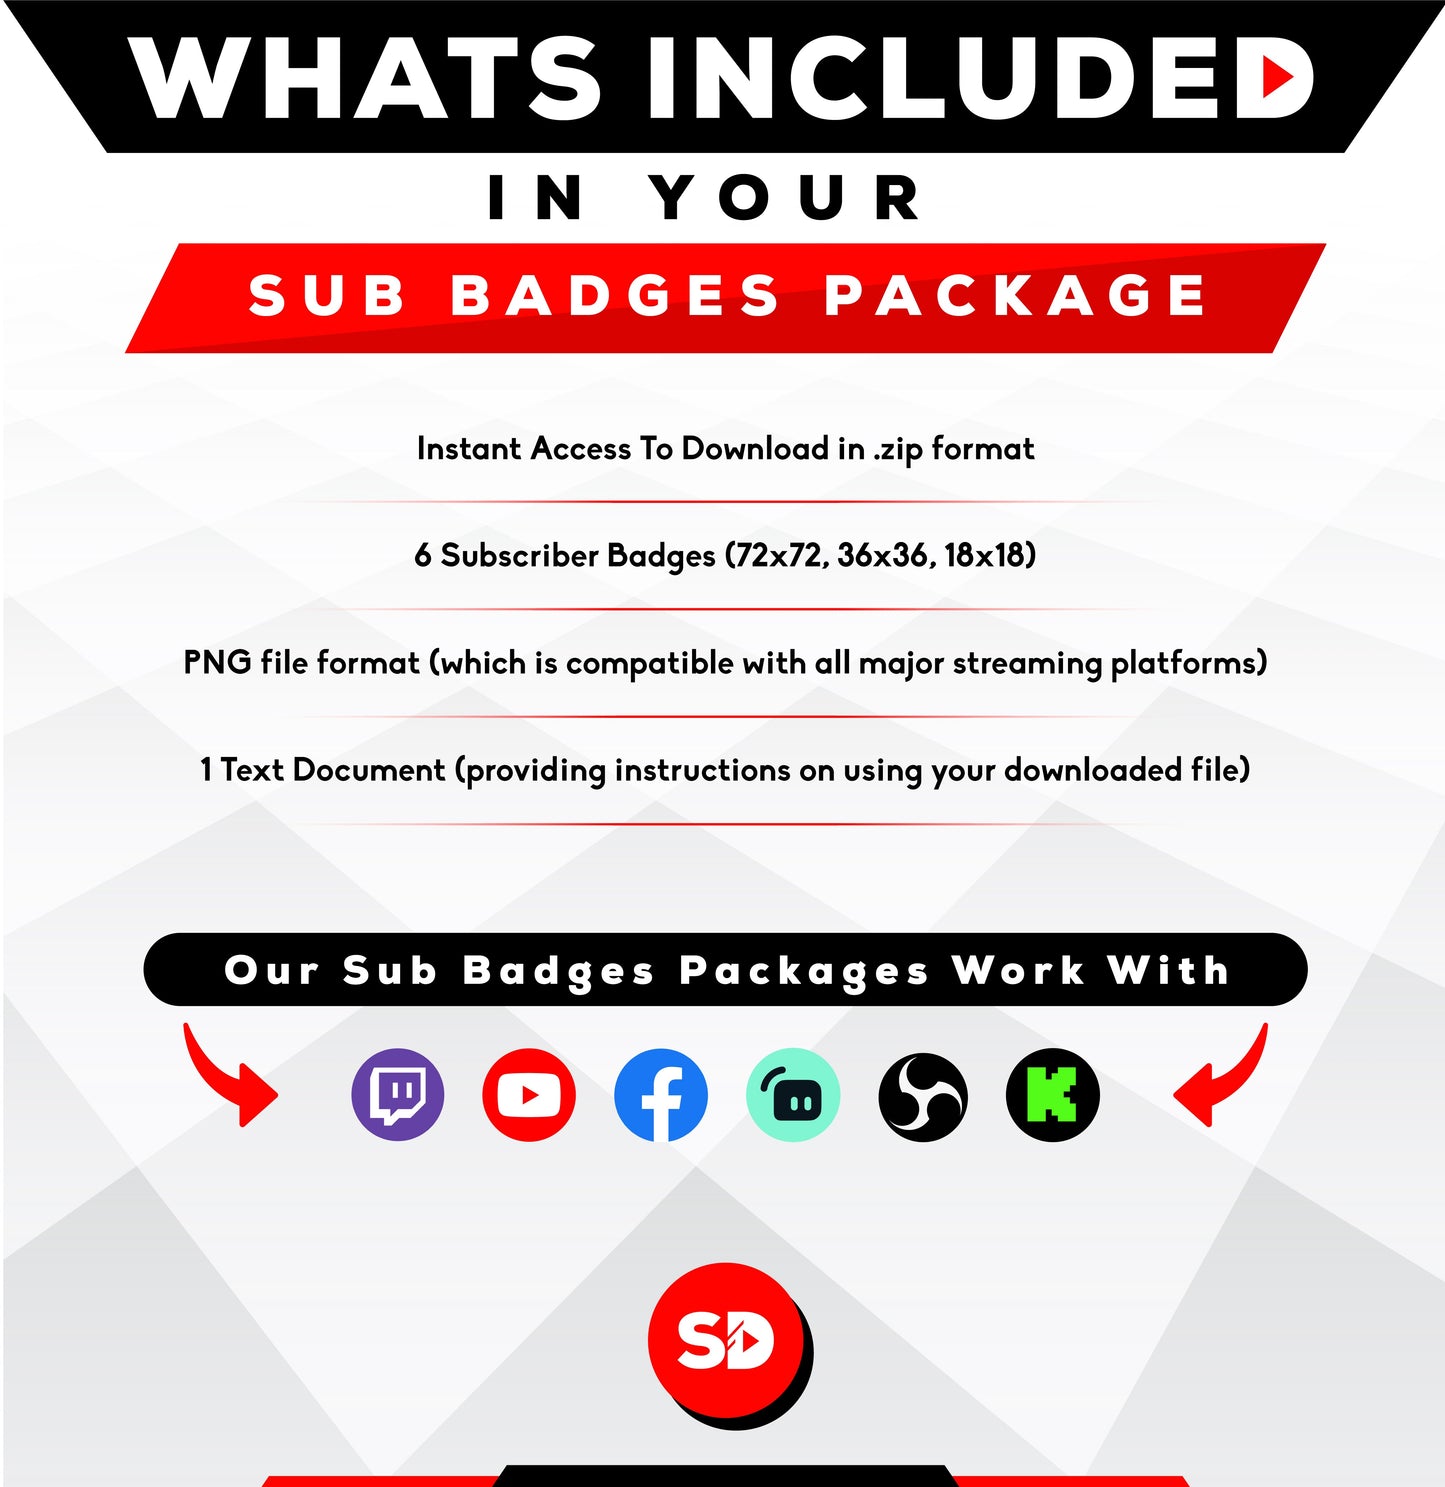 whats included in your package - sub badges - ps5 controller - stream designz